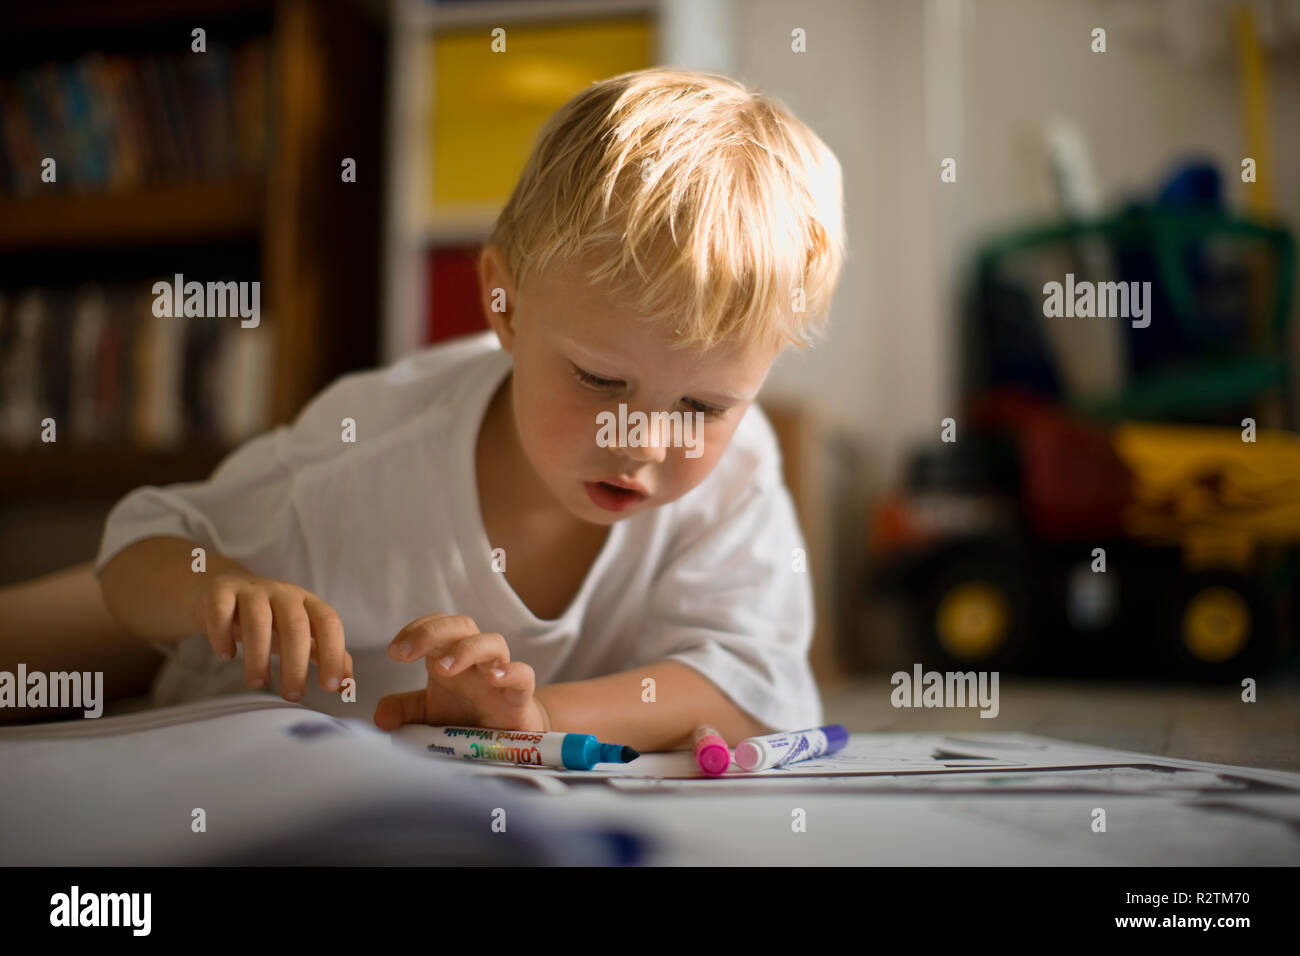 A young boy colouring in at home. Stock Photo